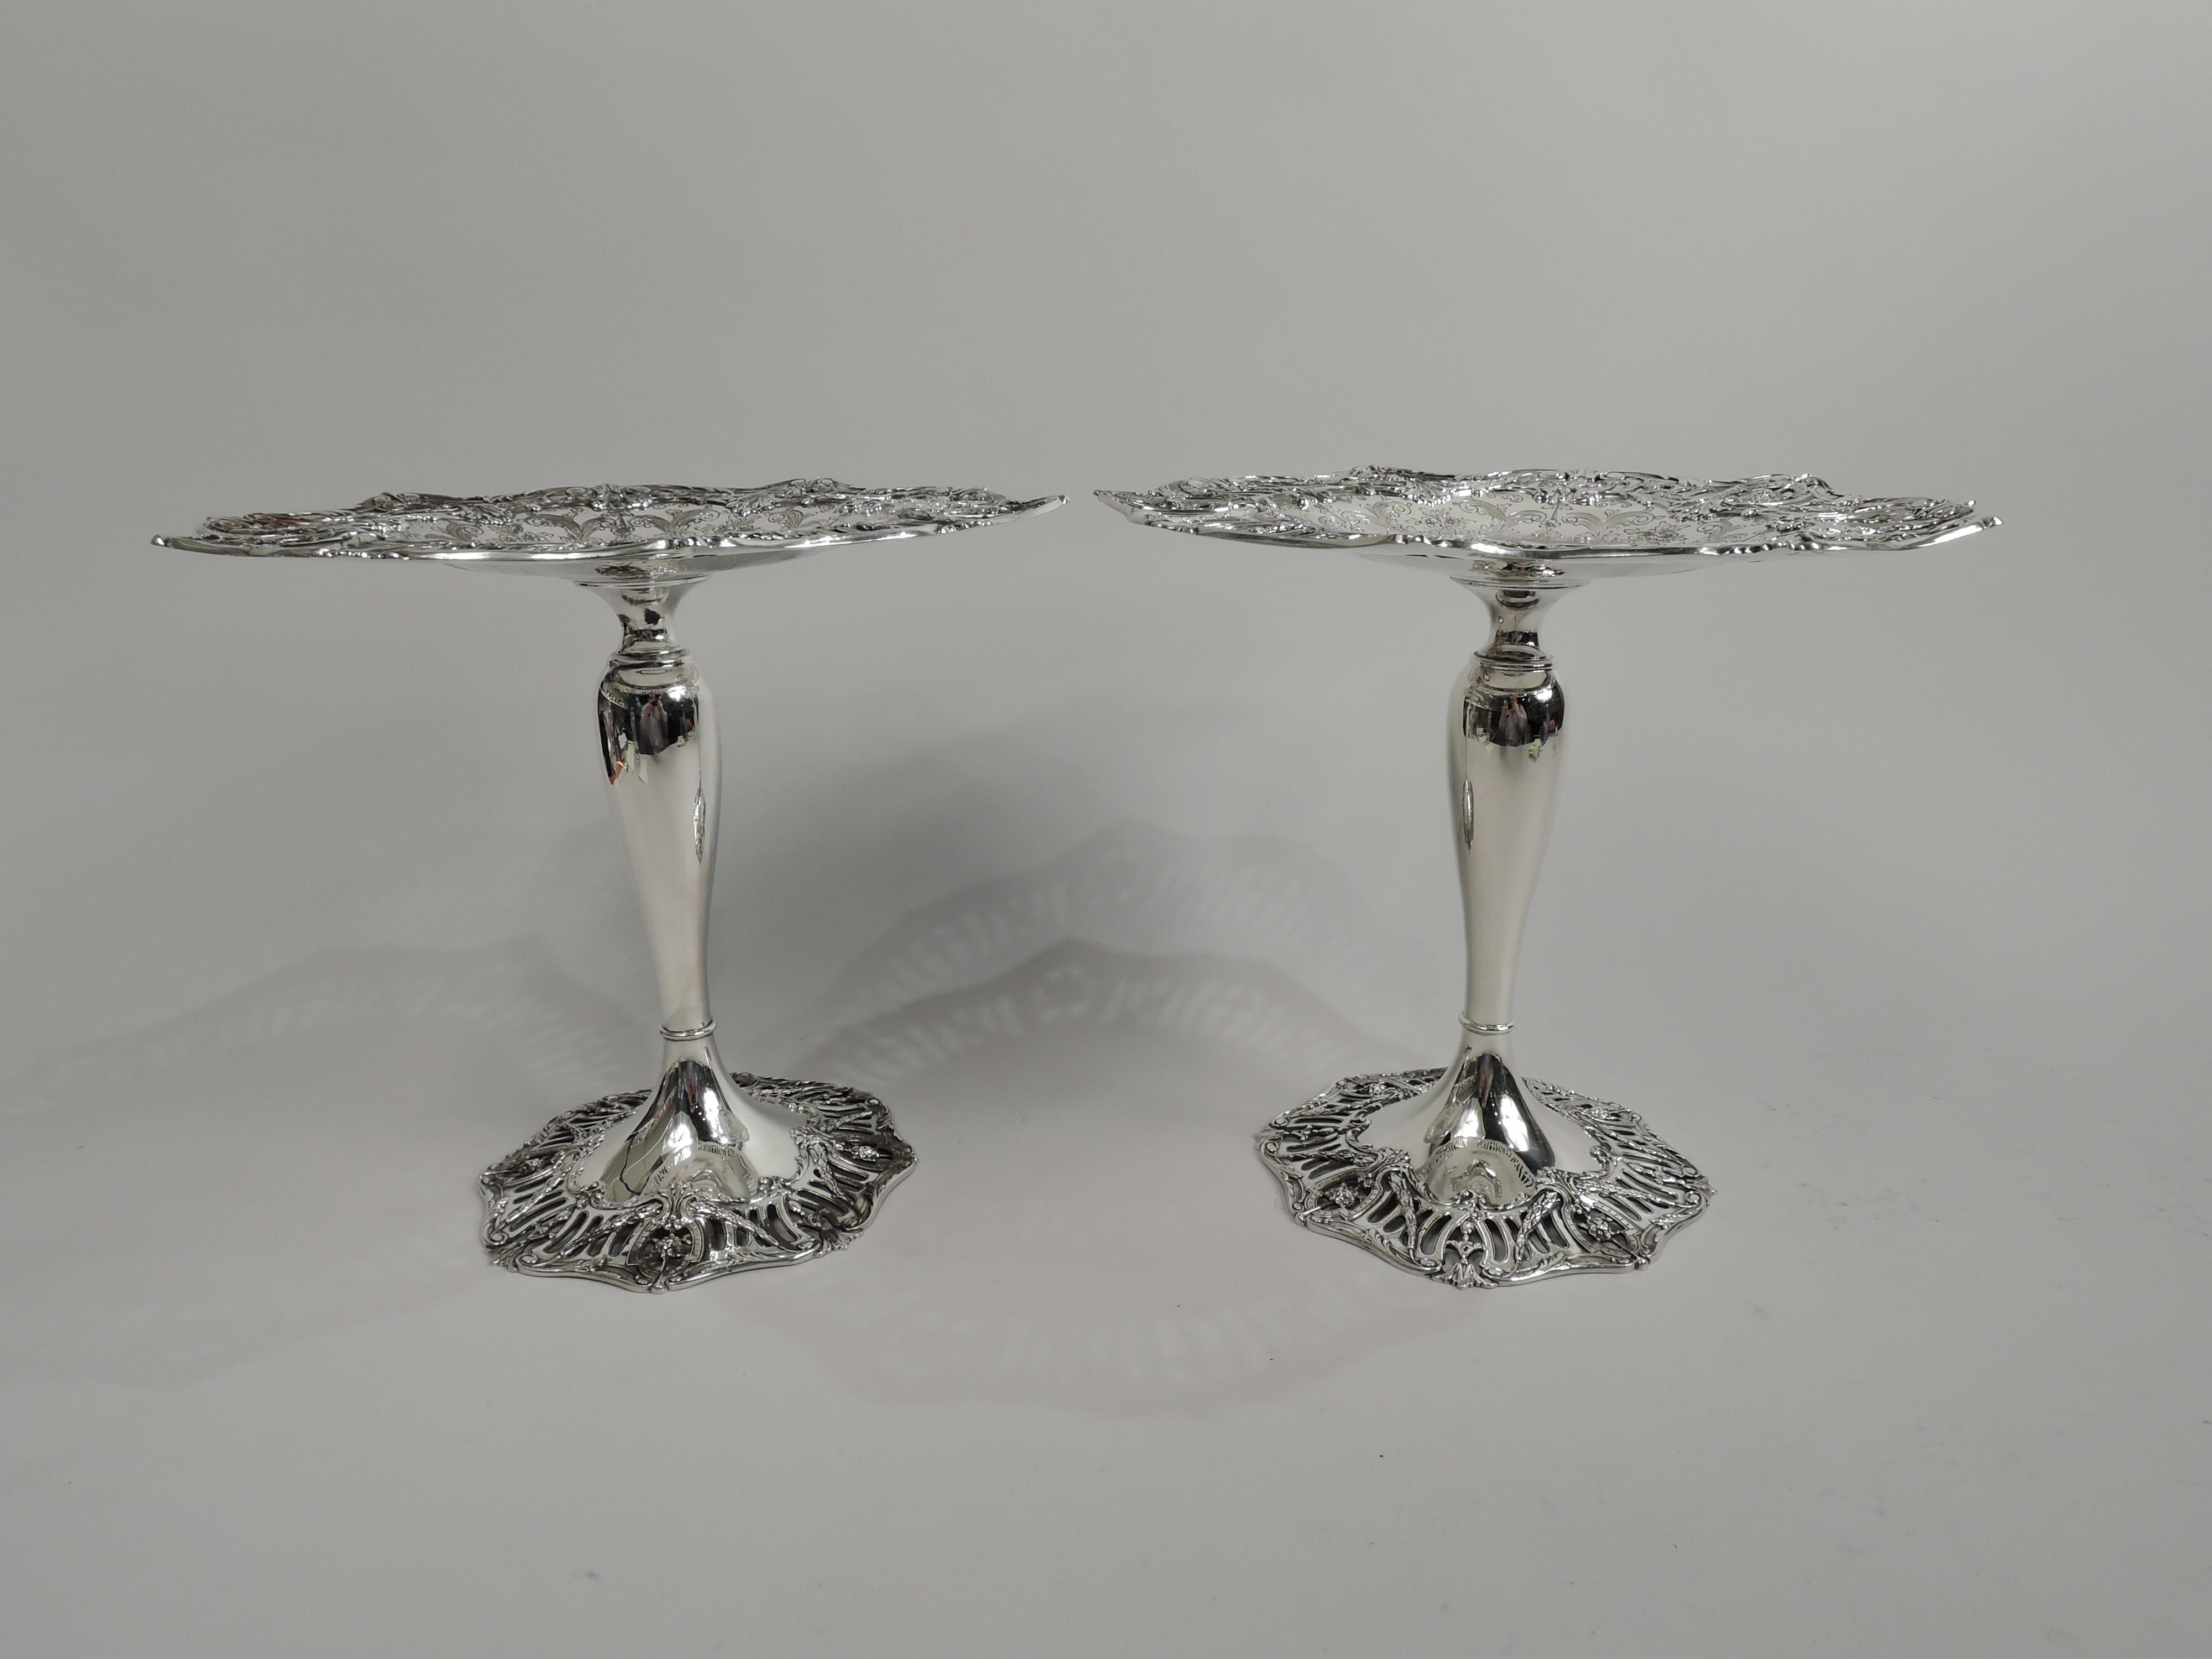 Pair of Edwardian Regency sterling silver compotes. Made by Graff, Washbourne & Dunn in New York, ca 1909. Each: Round and shallow well bordered by engraved scrolls, leaves, and flowers; center vacant. Baluster shaft with base knop and raised foot.